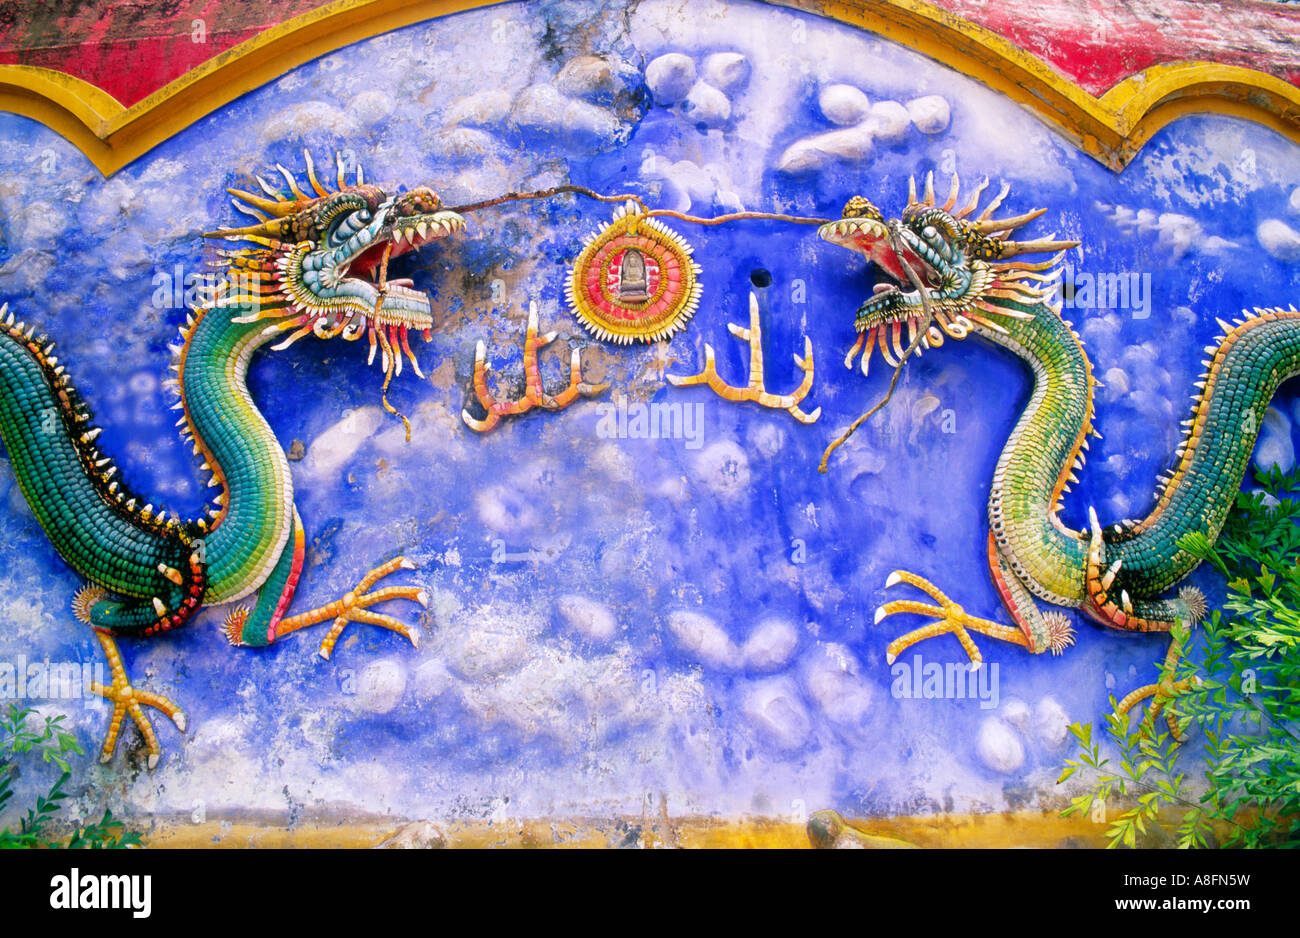 Chinese Dragon symbolized power, potent and good luck in Chinese culture Stock Photo